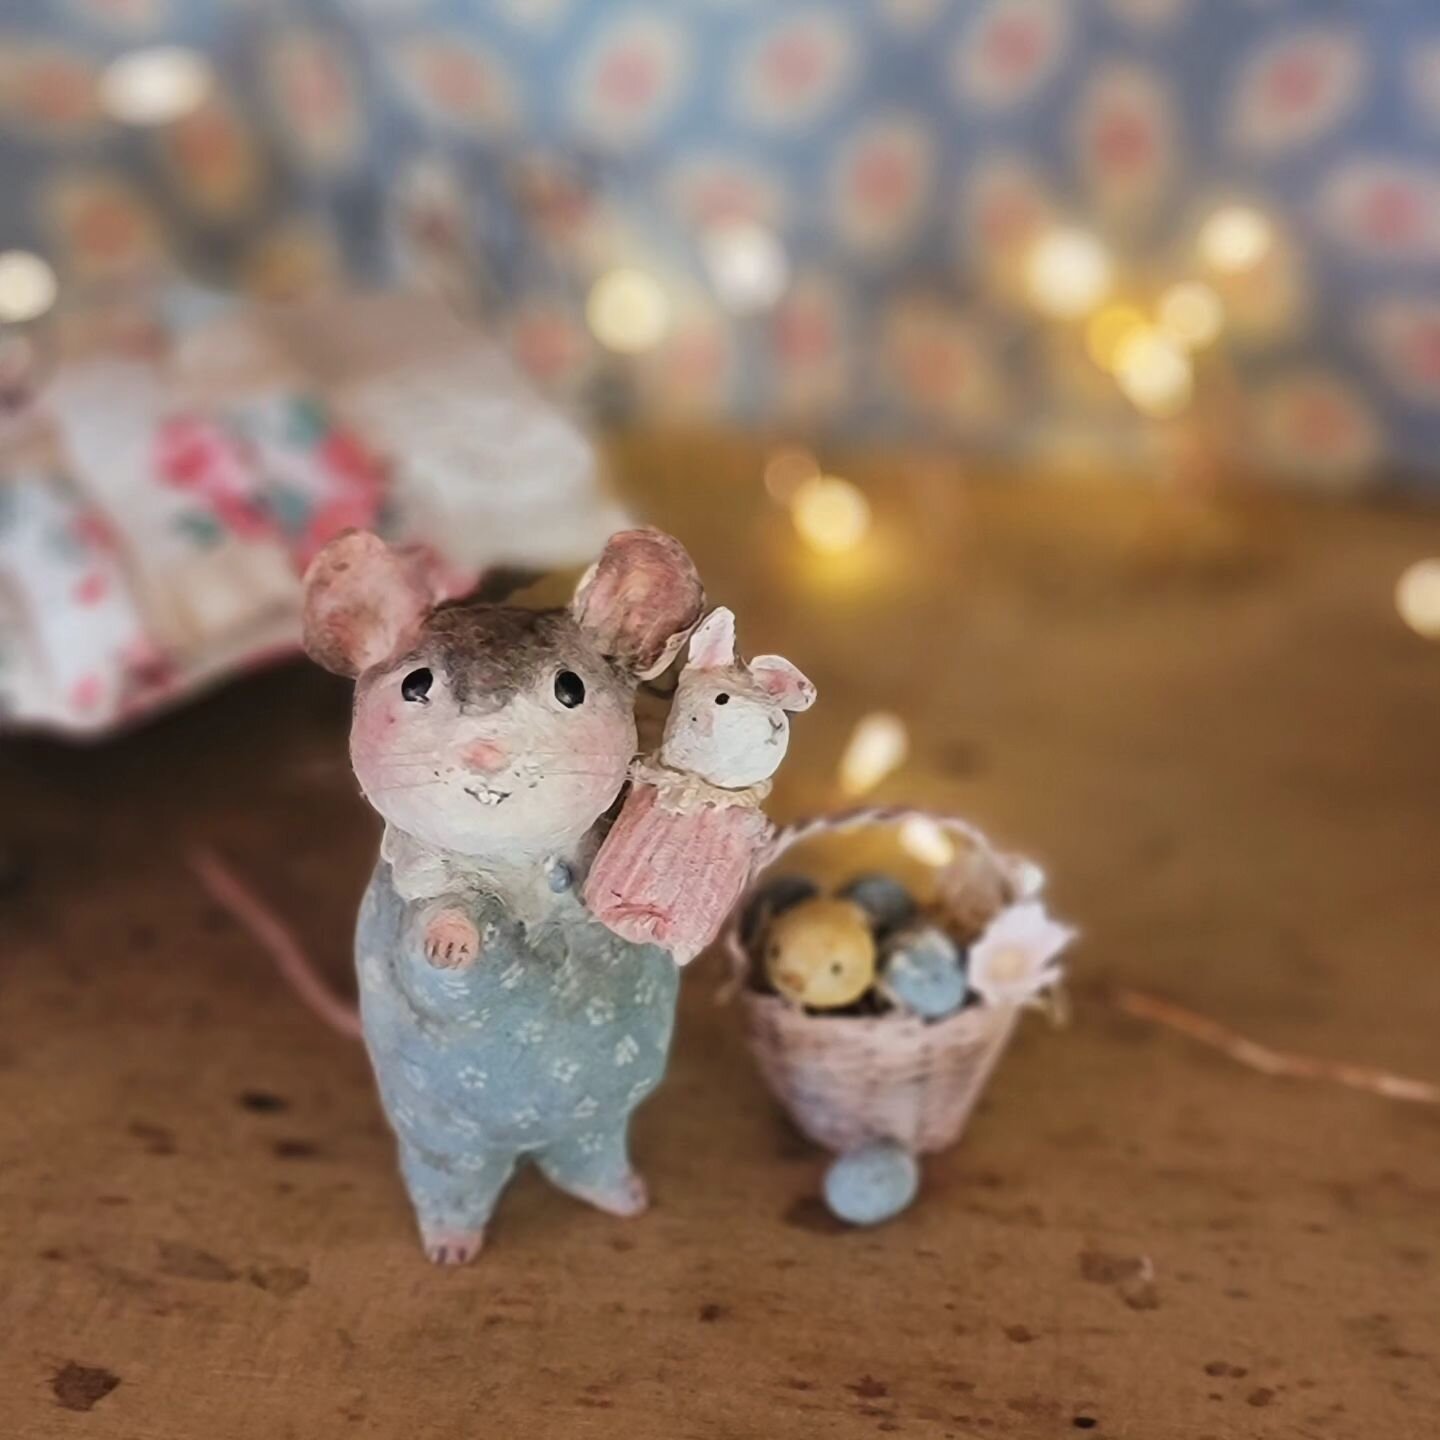 Little Tommie Tippie and his rabbit doll Tulip were a happy creative detour I took the last few days after having a long talk with my dear and wonderful friend @jonehallmark 🤗💙🐭💙 I've been struggling the past few months as I create, to feel free 